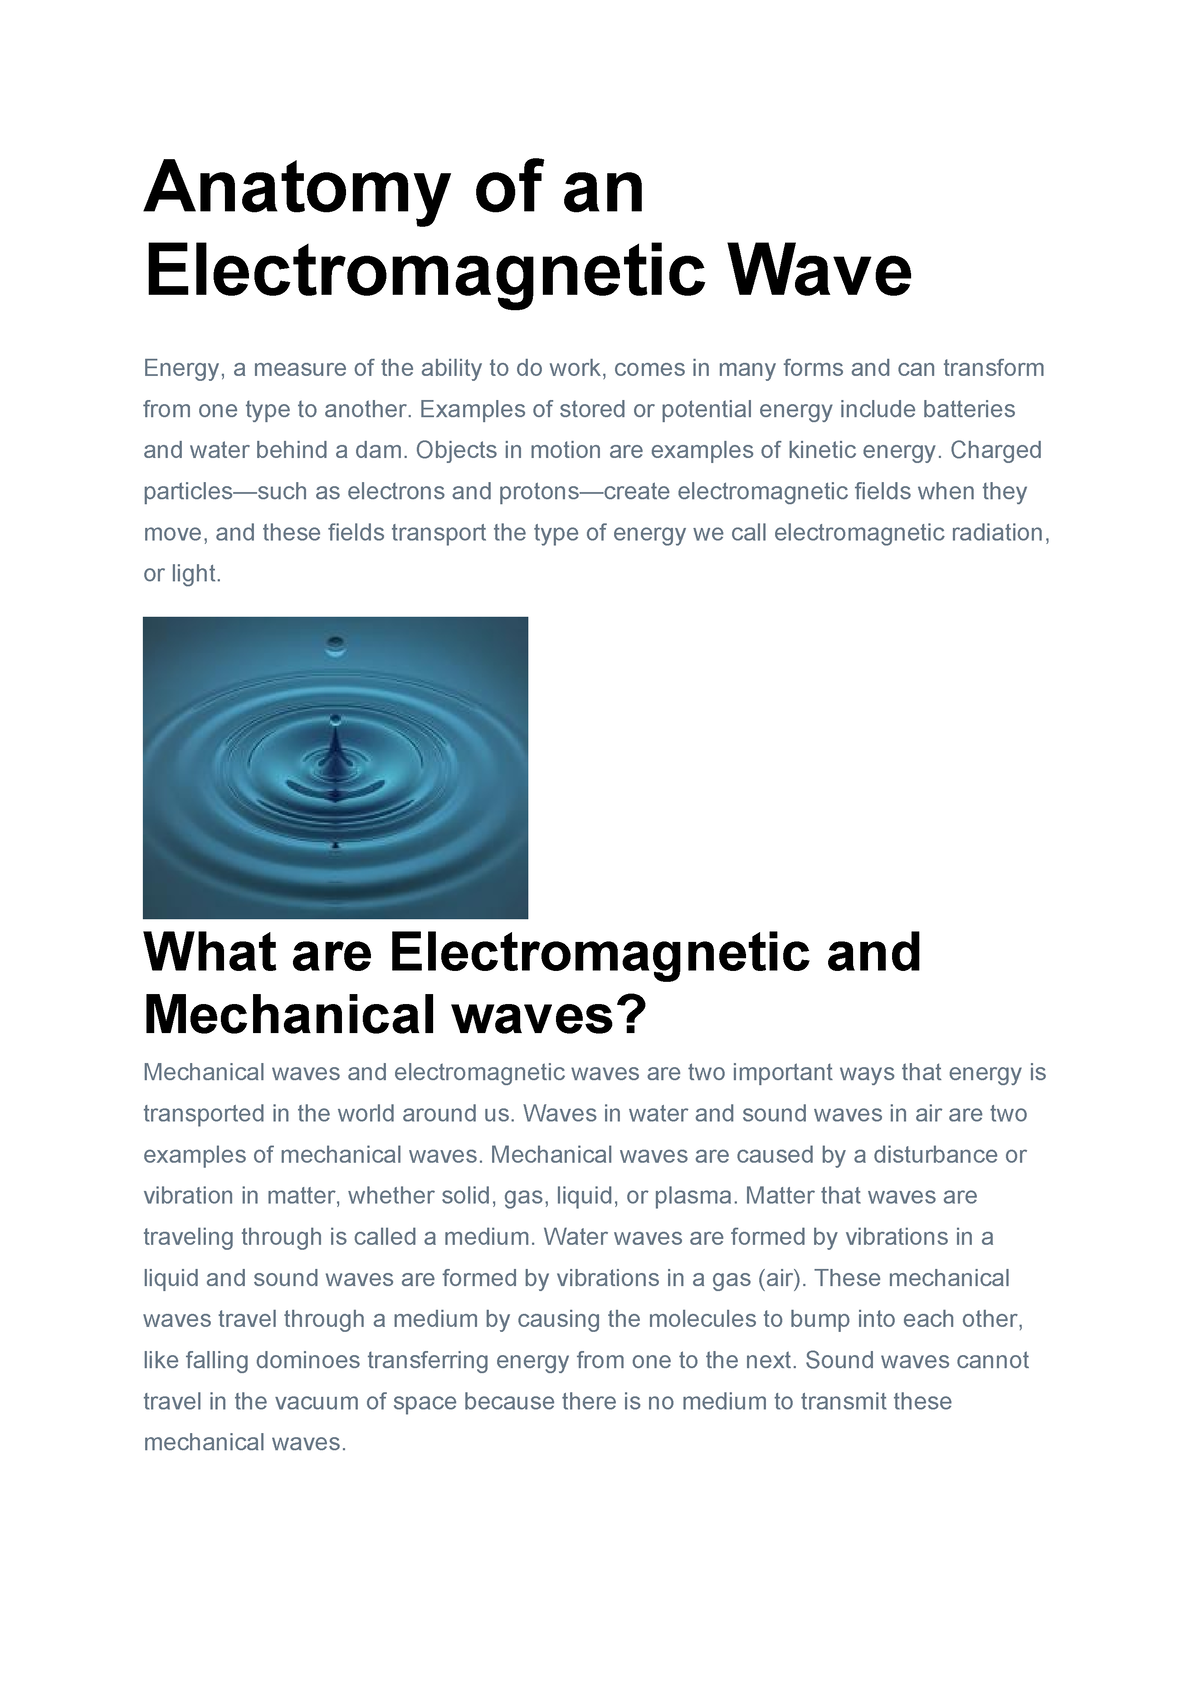 Anatomy of an Electromagnetic Wave